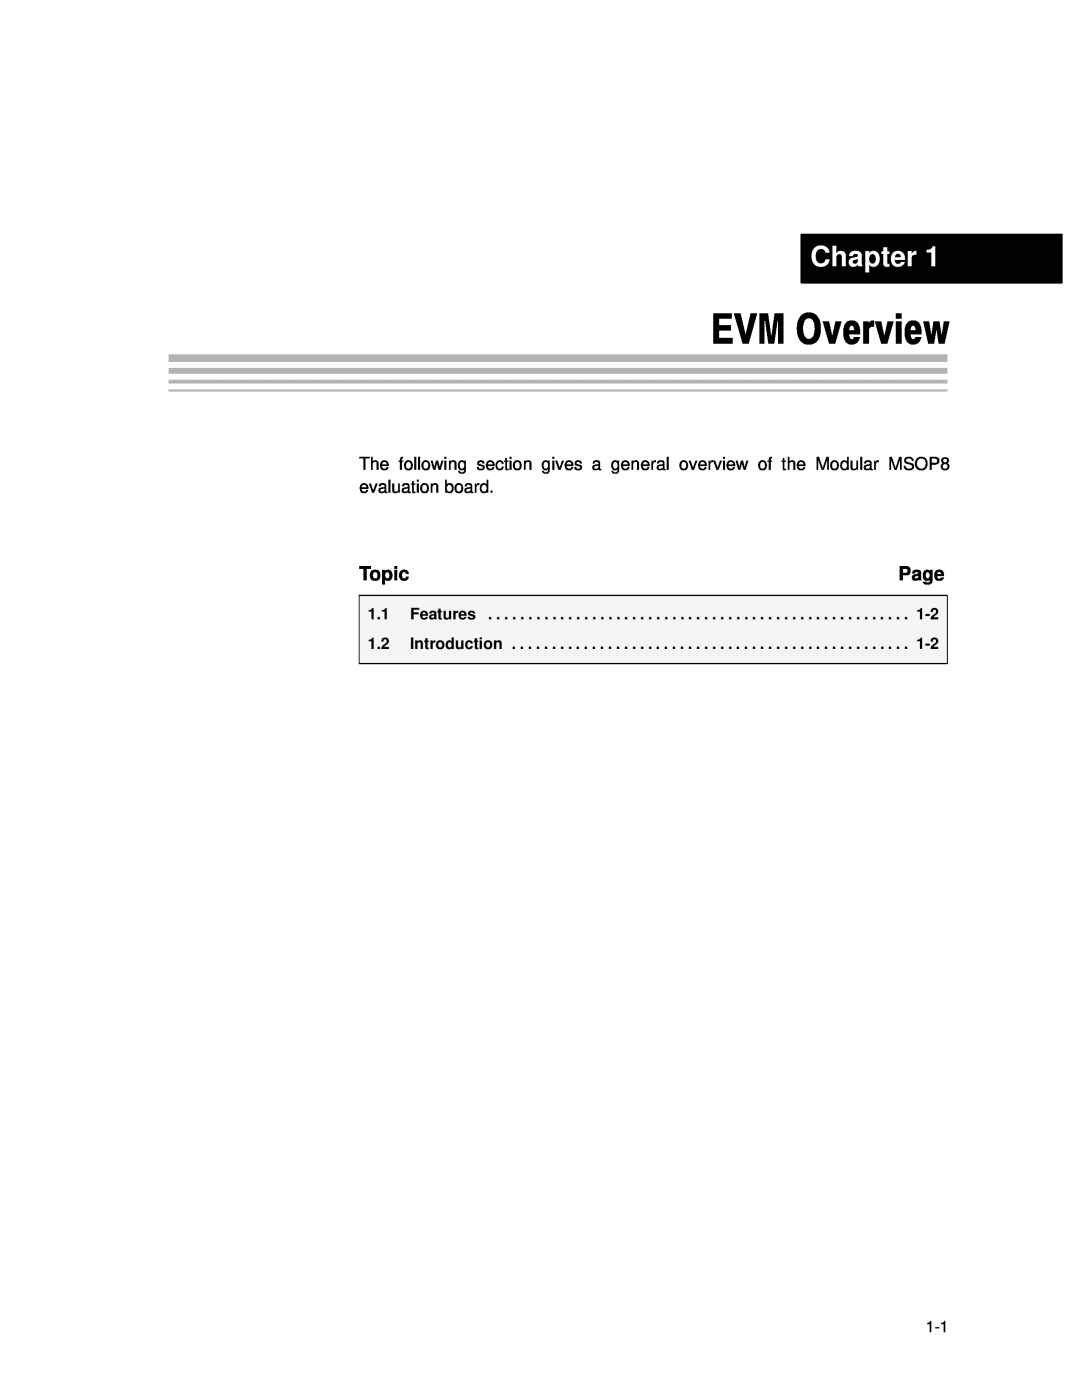 Texas Instruments MSOP8 manual EVM Overview, Chapter, Page, Topic, Features, Introduction 